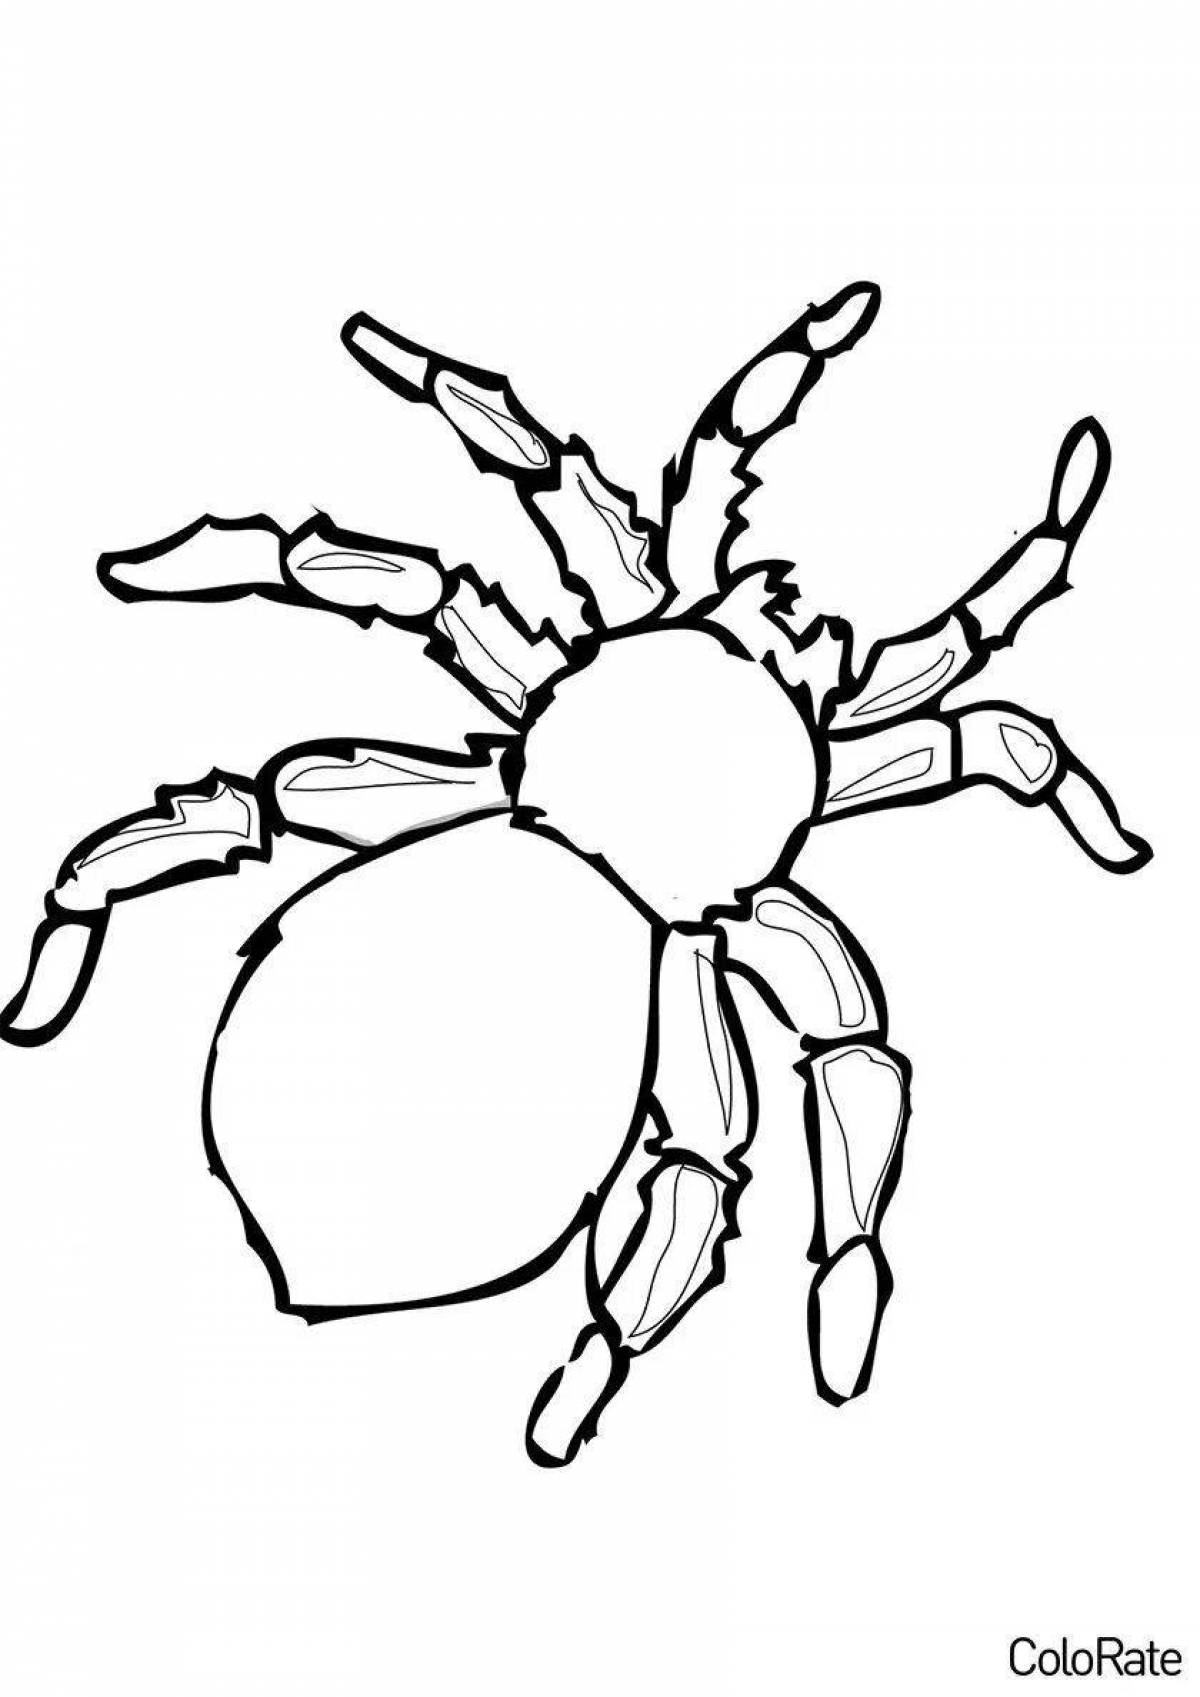 Amazing spider coloring page